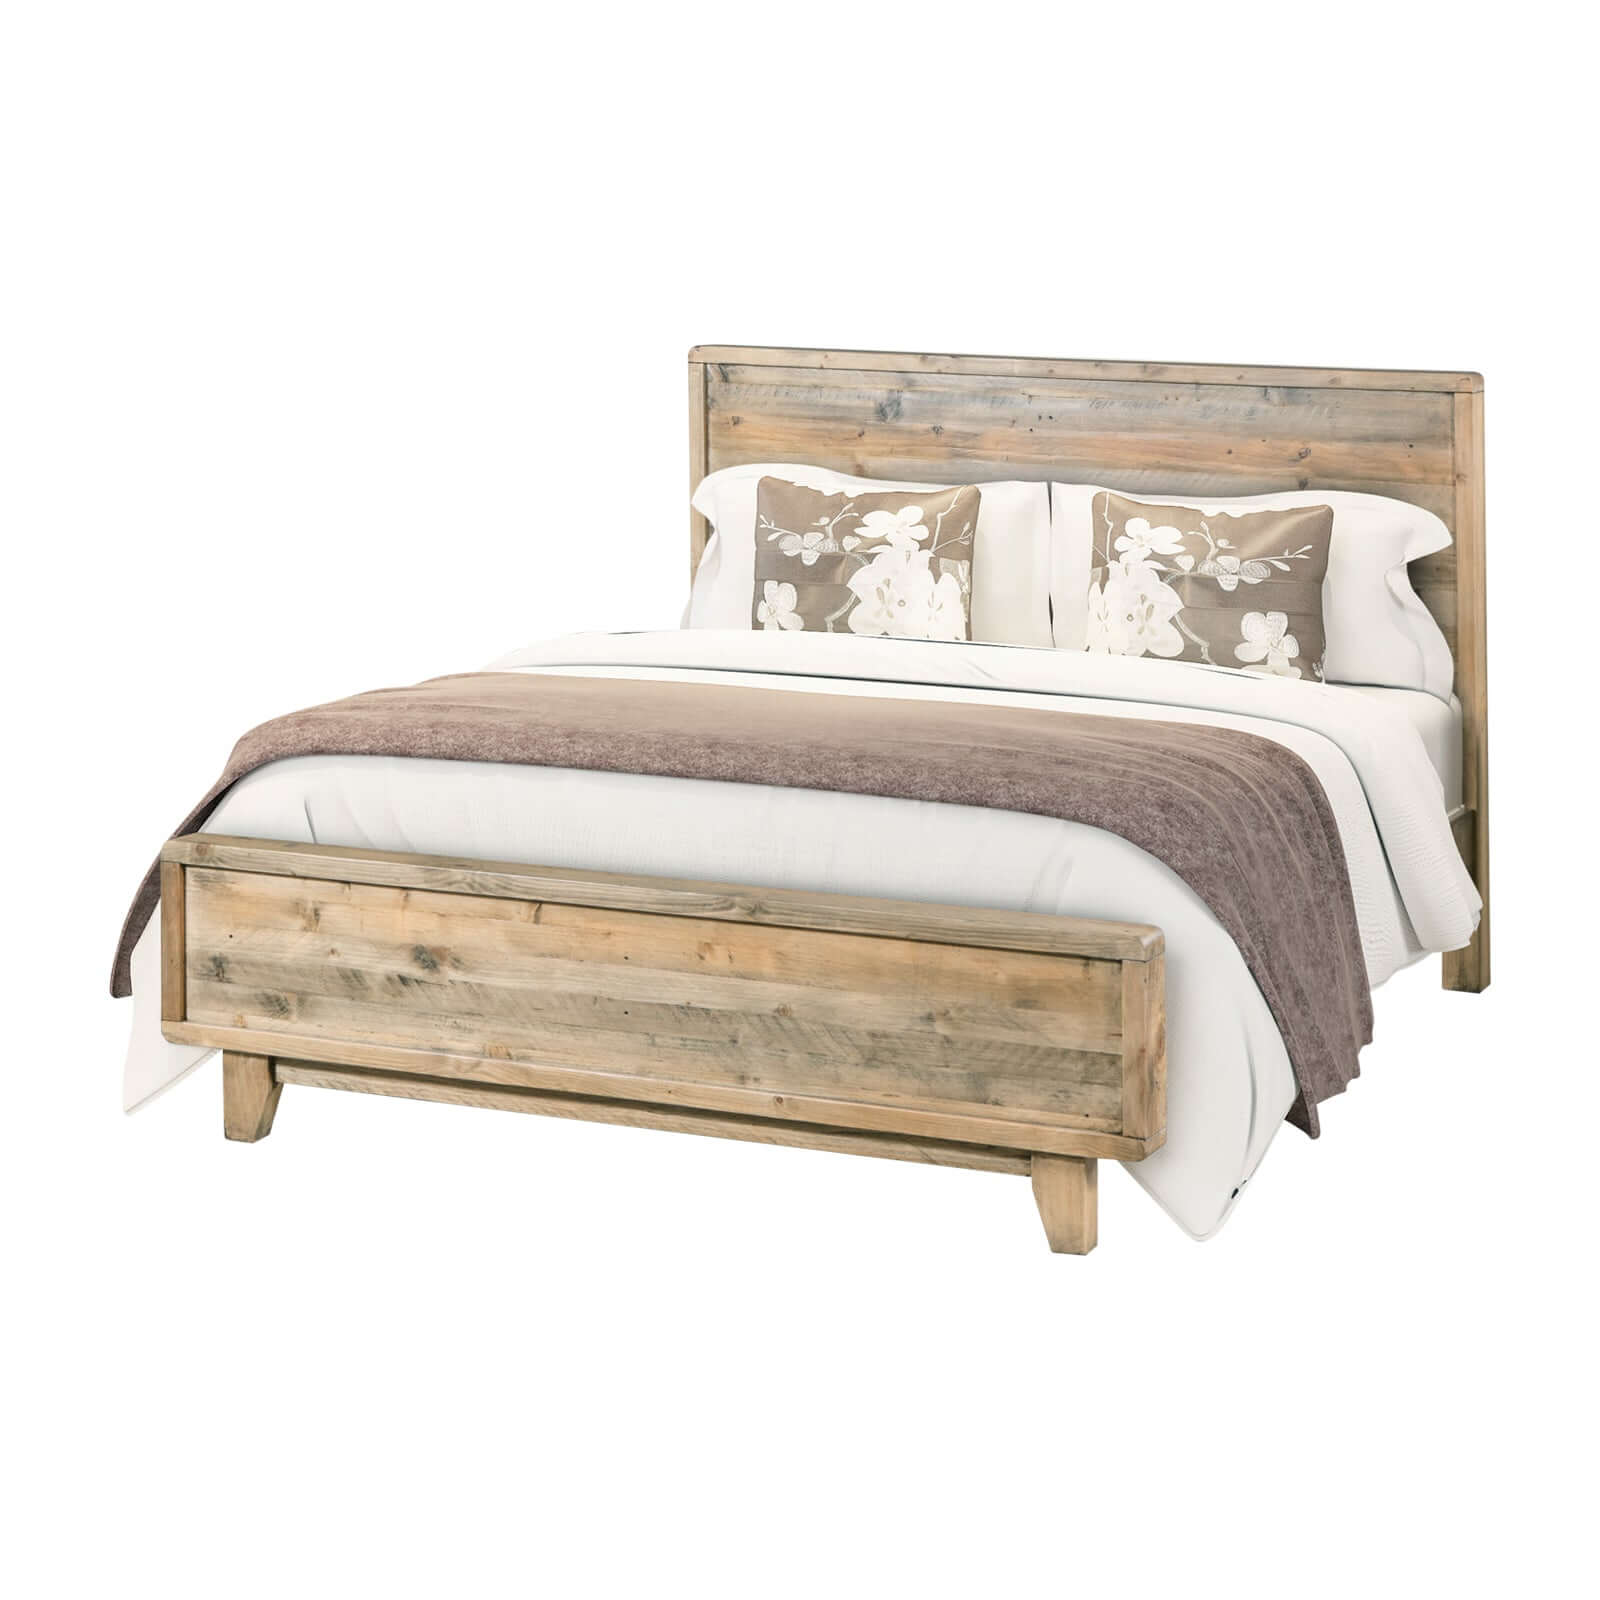 Antique Wooden Bed Frame | Double Size | Furn House-Upinteriors